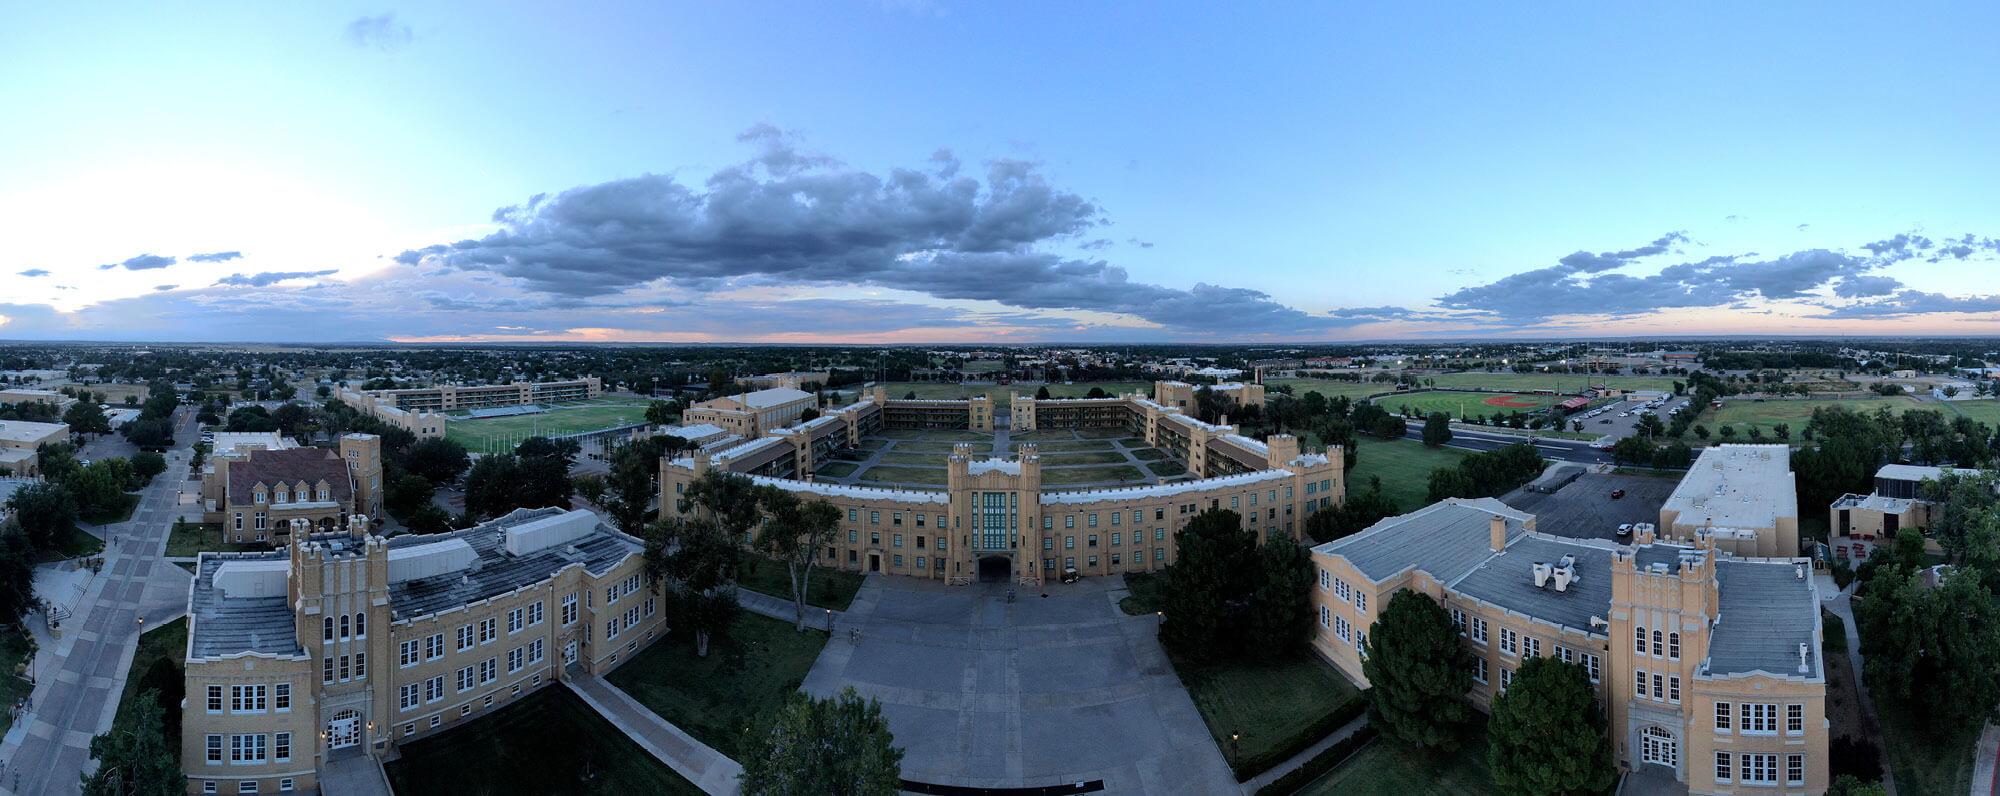 Orientation & What to Know - New Mexico Military Institute